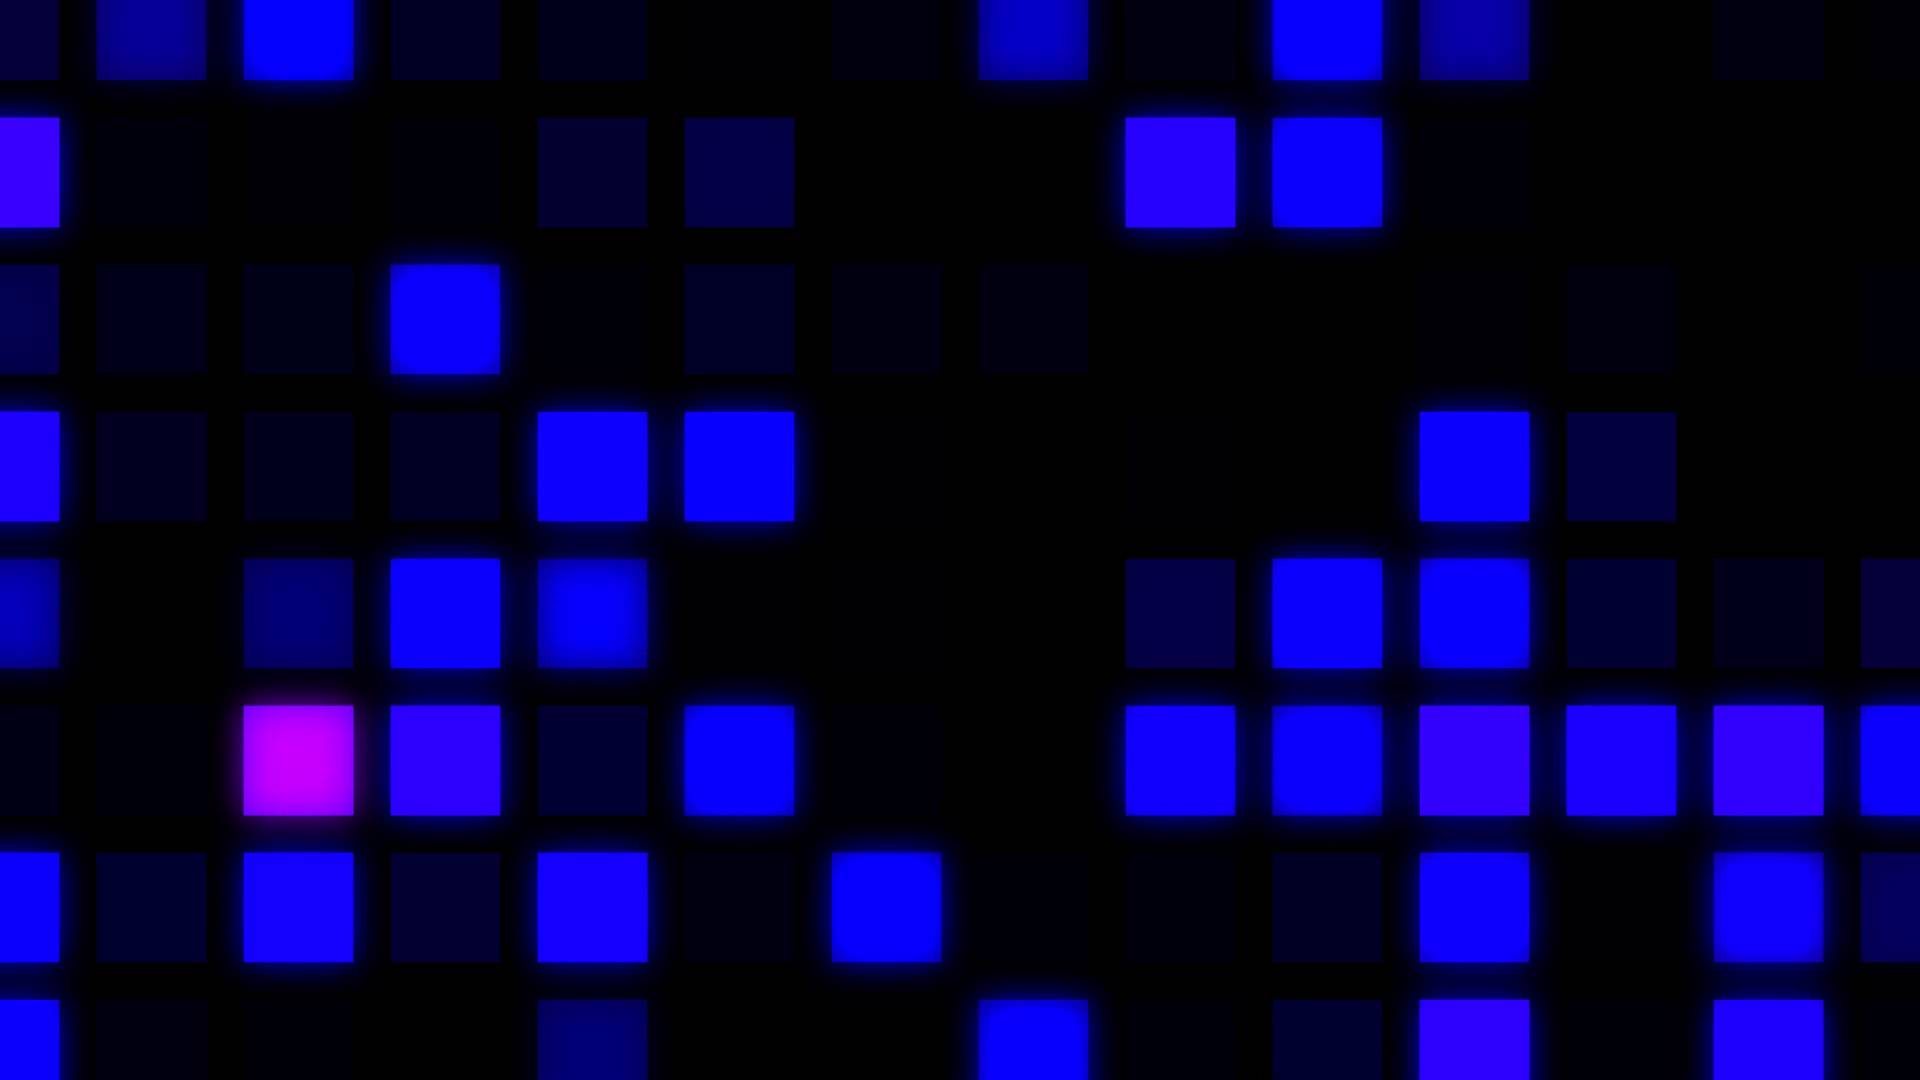 Videogame pixel Background ANIMATION FREE FOOTAGE Big Blue square ...